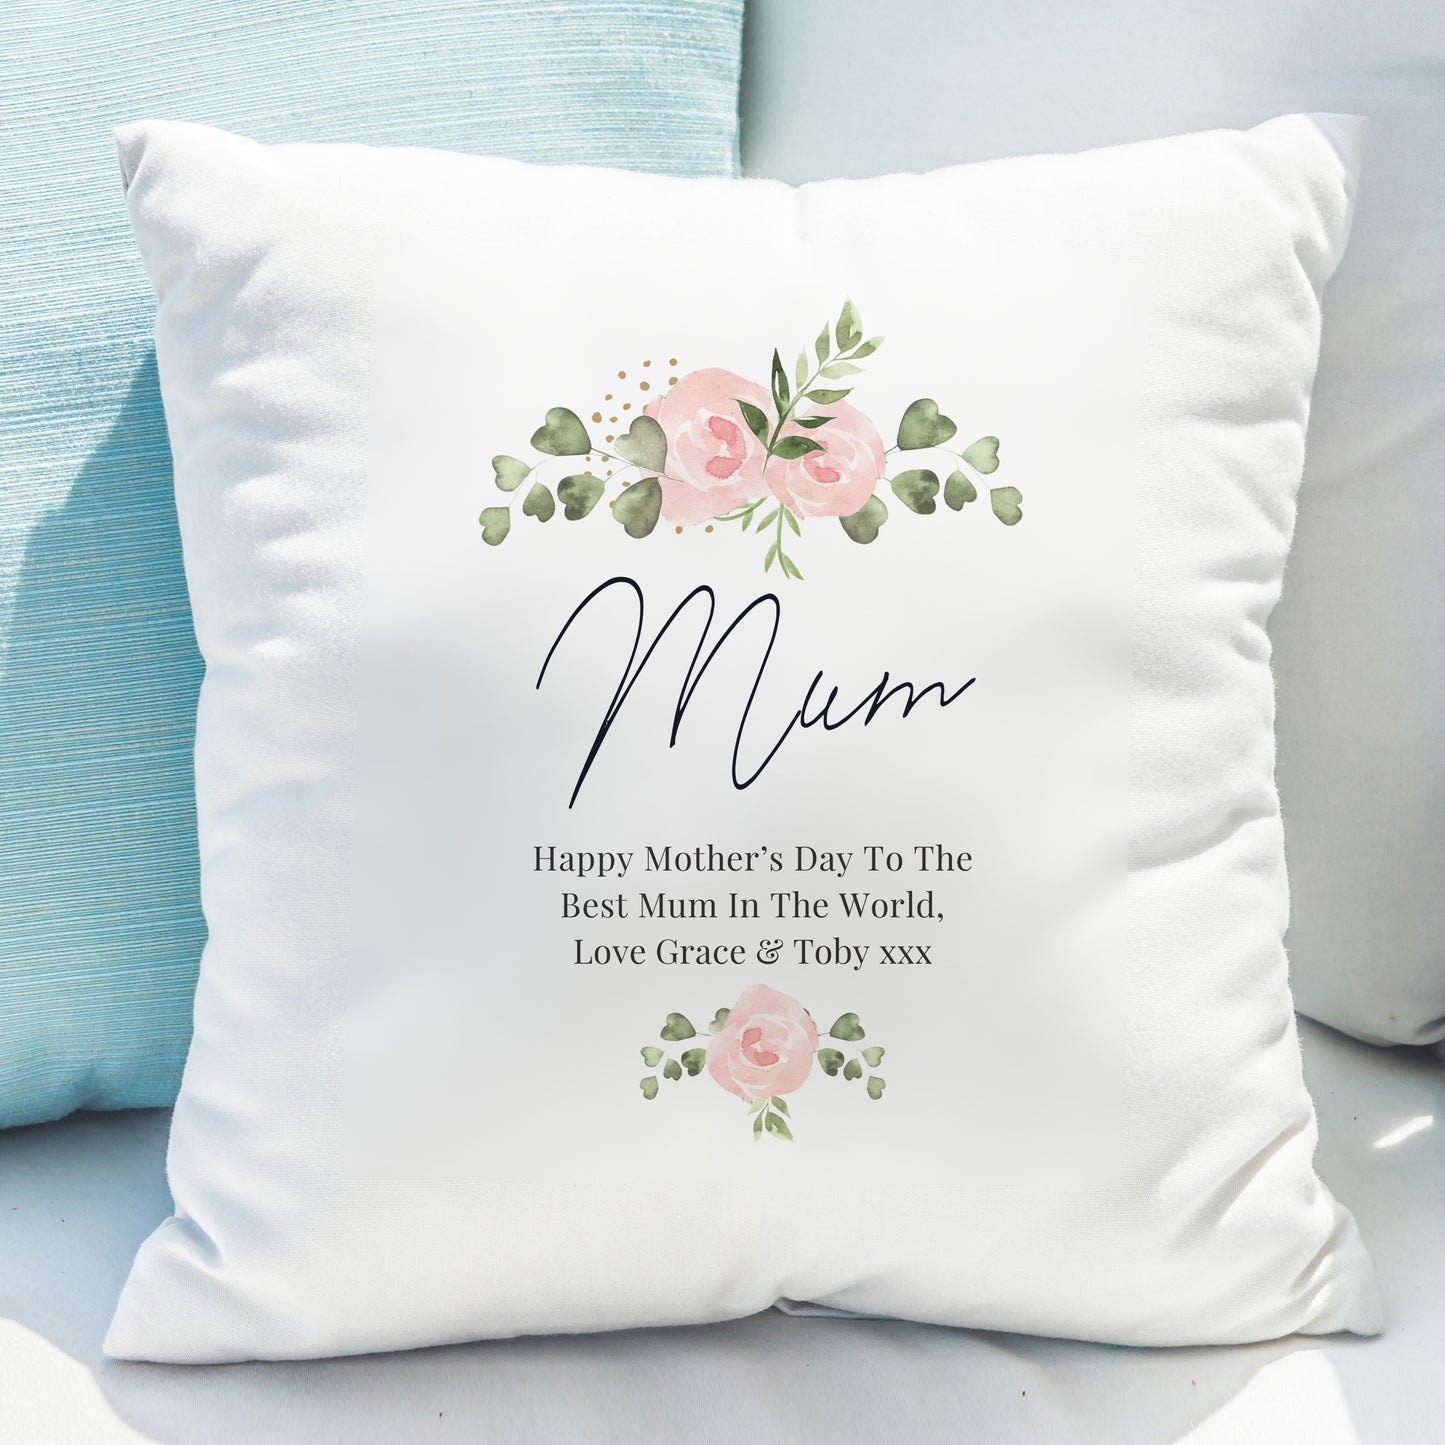 Personalised Abstract Rose Cream Cushion Cover - Personalise It!